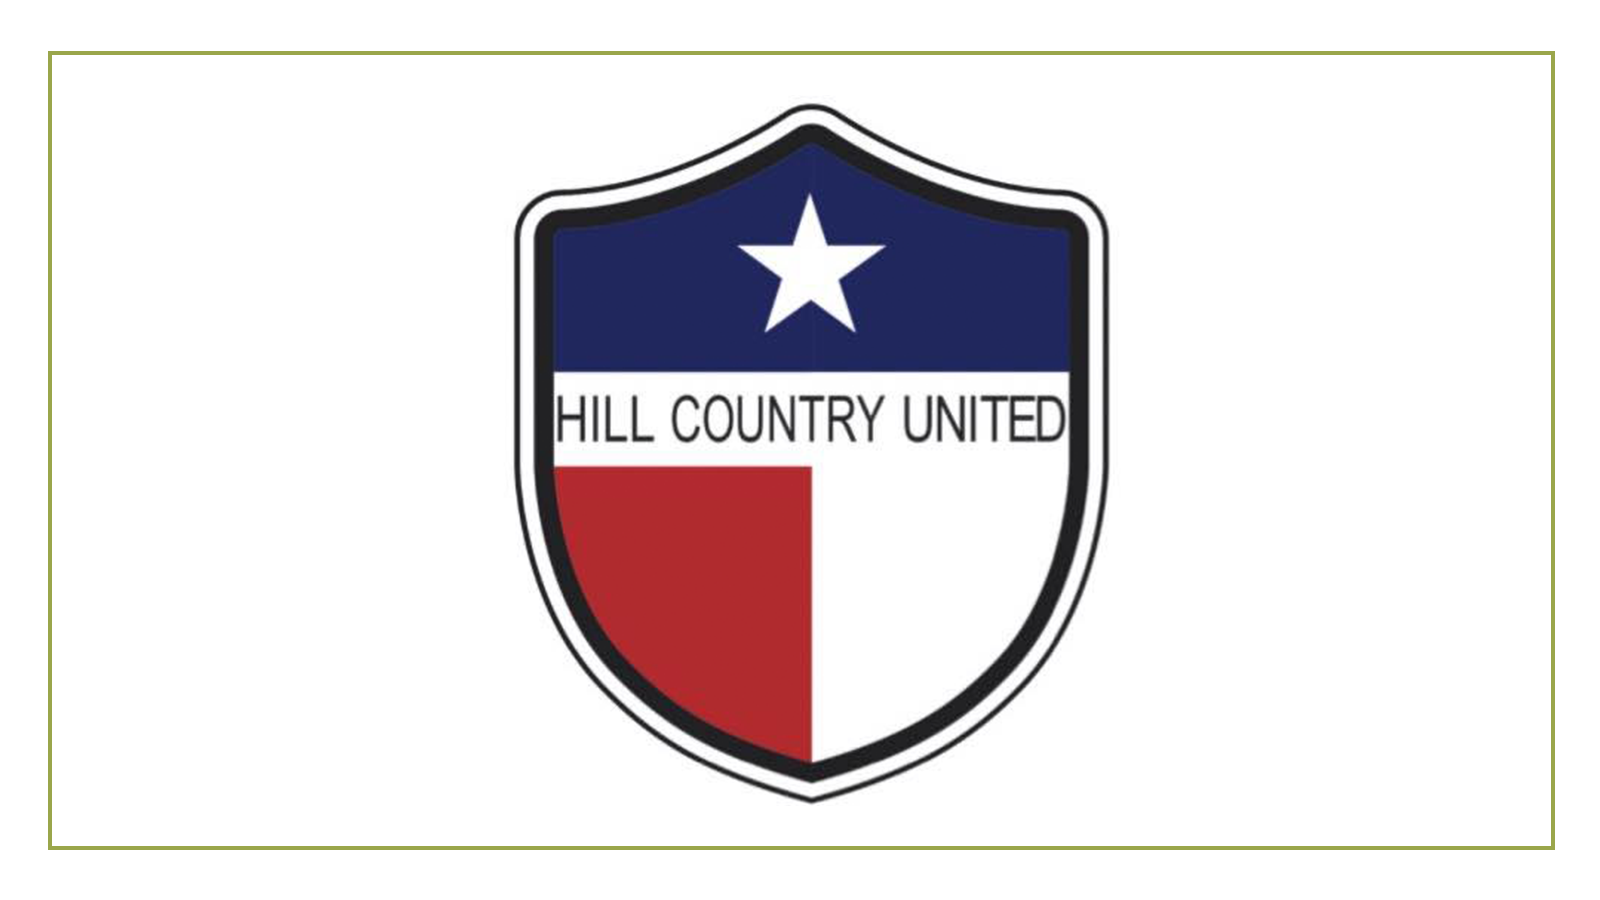 Hill Country United logo